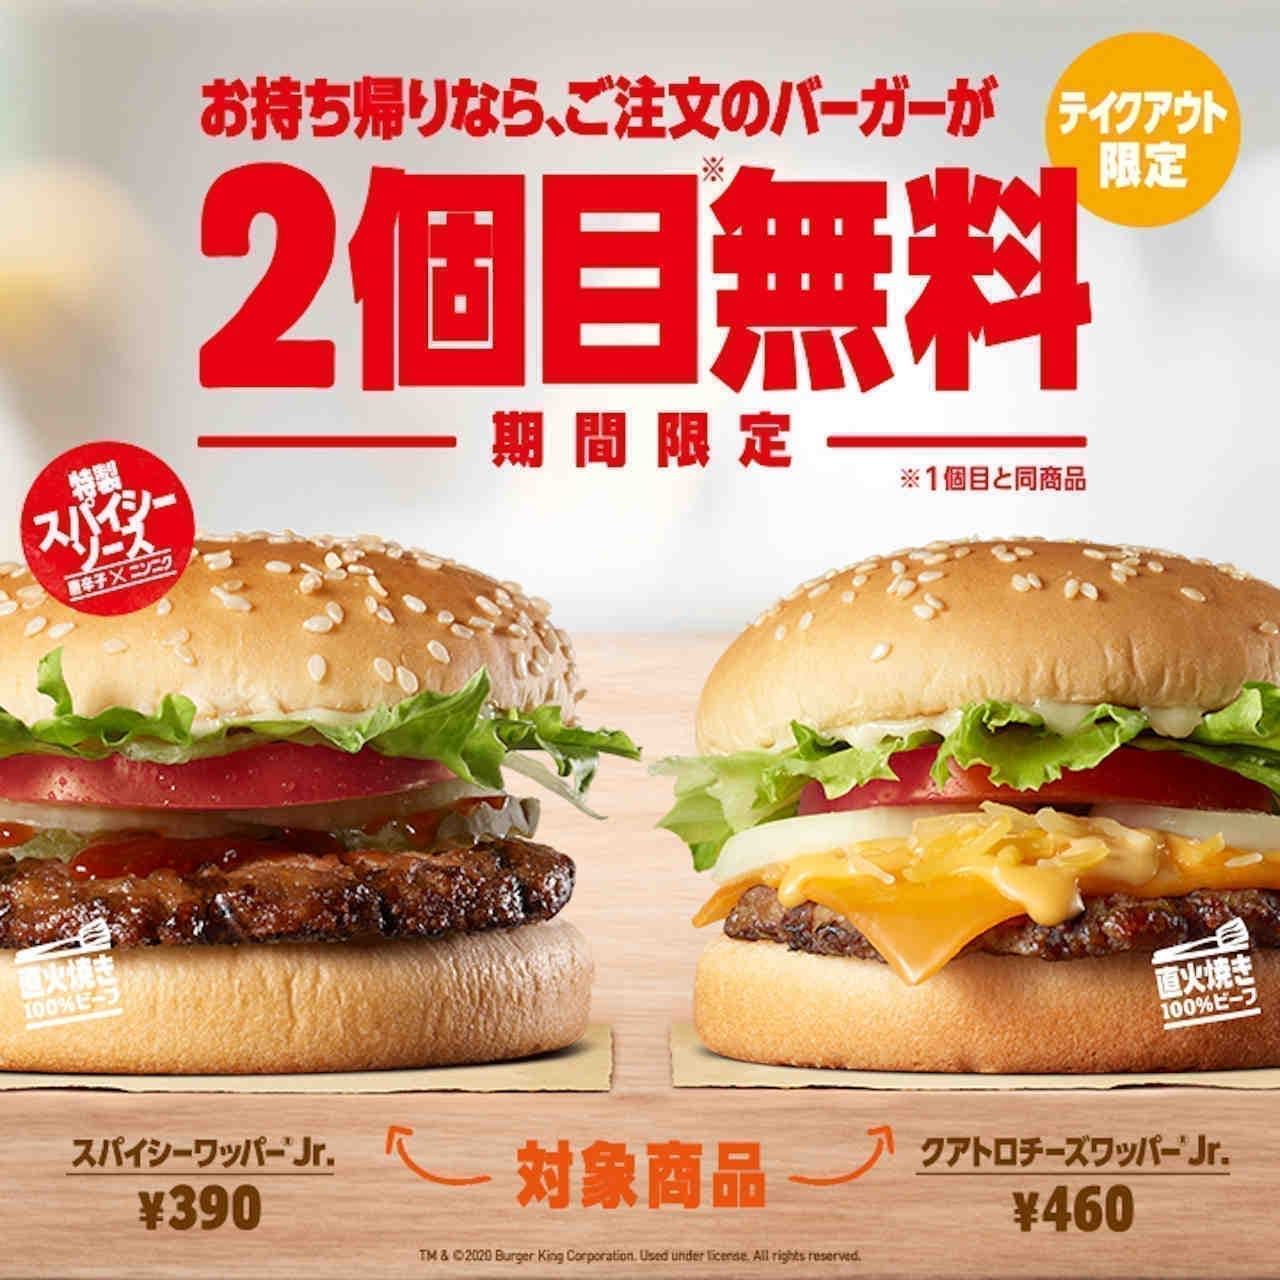 "Spicy Wapper Jr." "Quatro Cheese Wapper Jr." To go Limited Campaign at Burger King